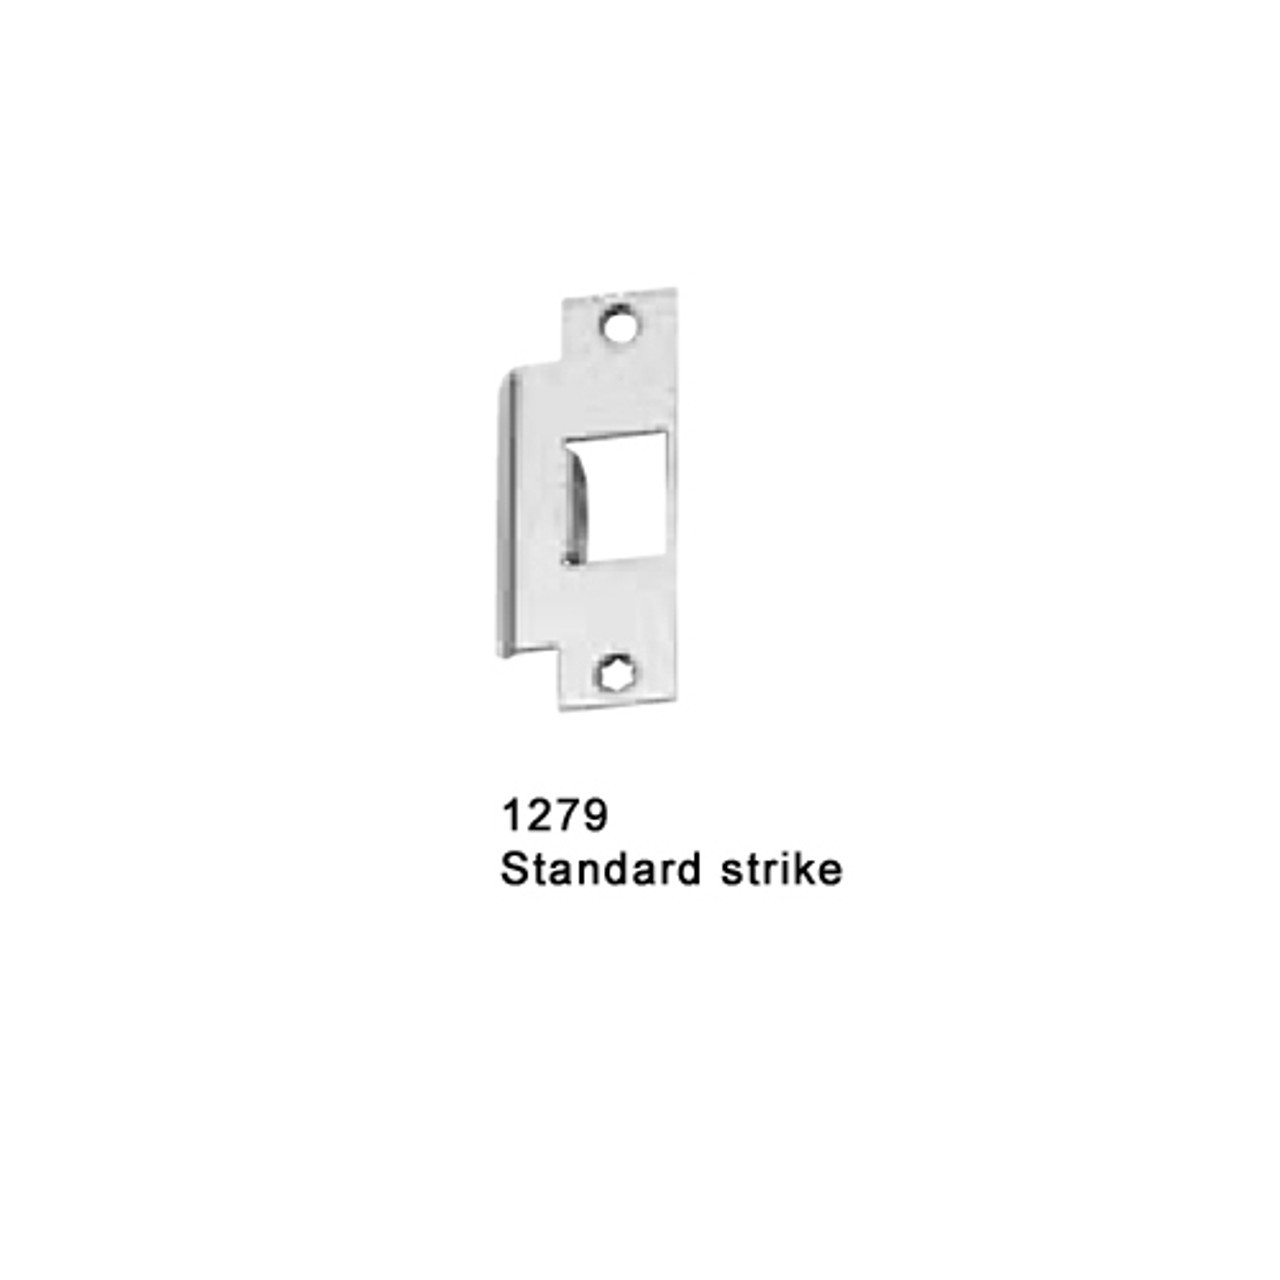 F-25-M-EO-US26-4-LHR Falcon 25 Series Fire Rated Exit Only Mortise Lock Devices in Polished Chrome